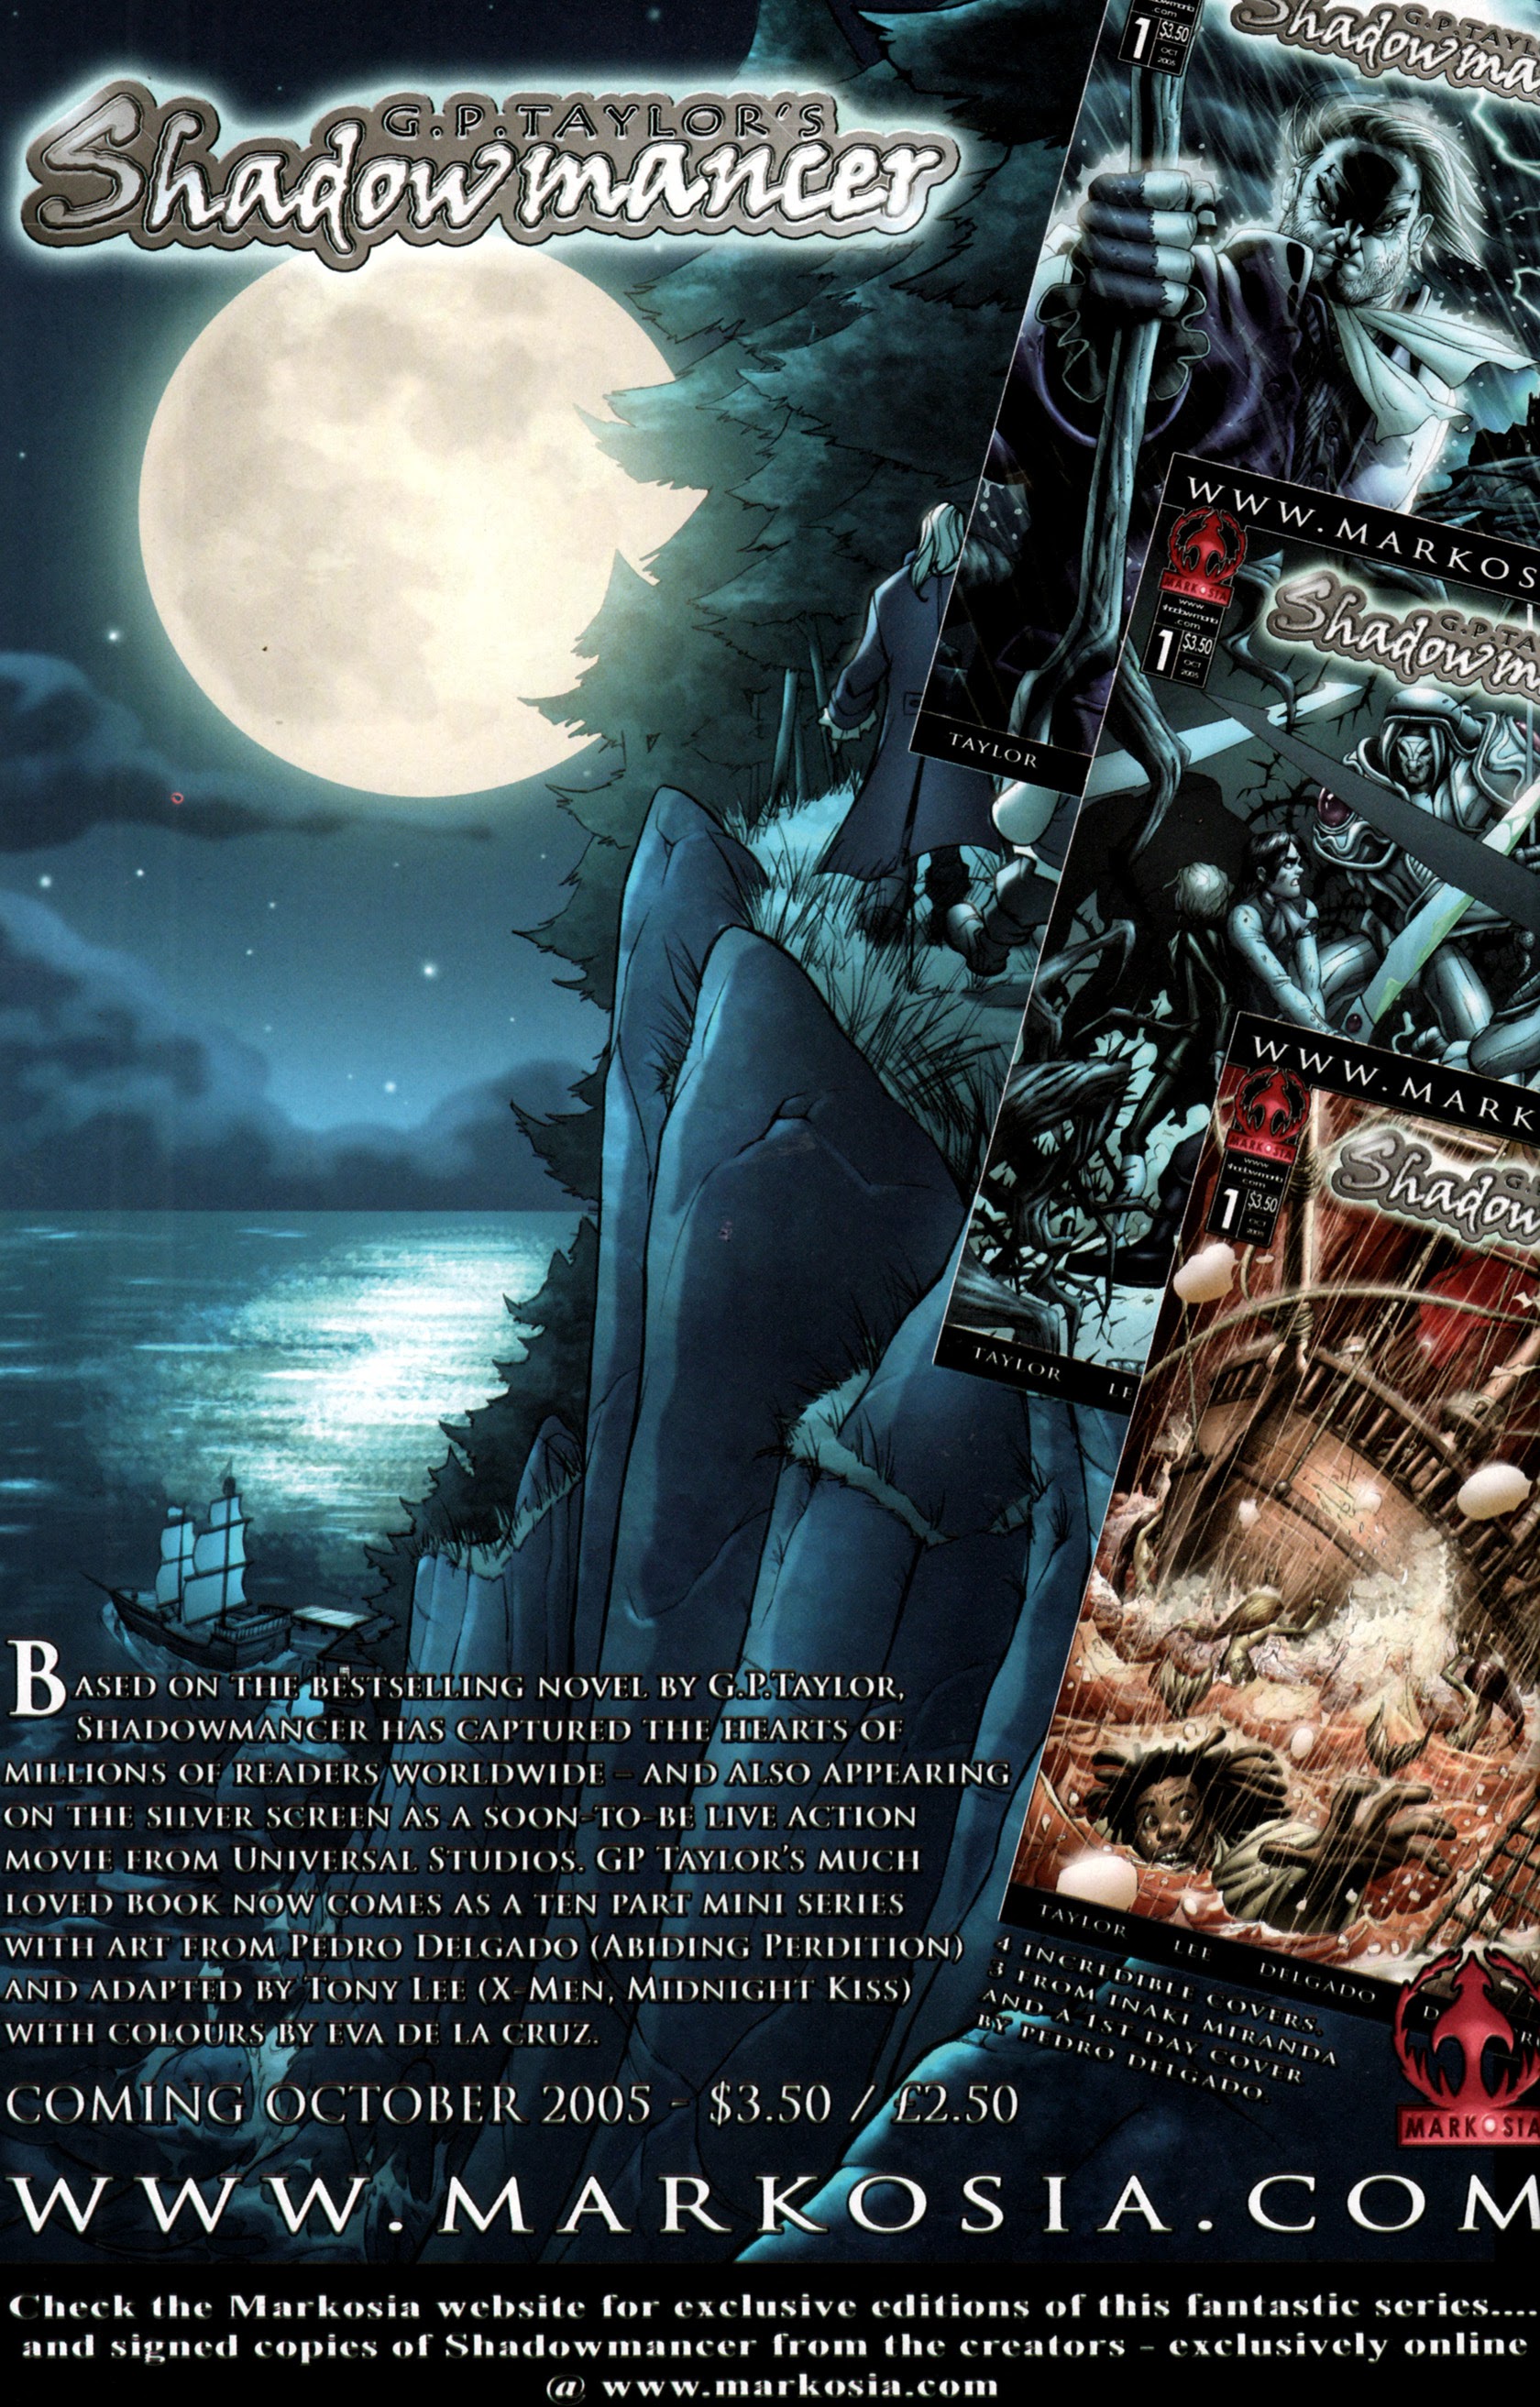 Read online Abiding Perdition comic -  Issue #1 - 31